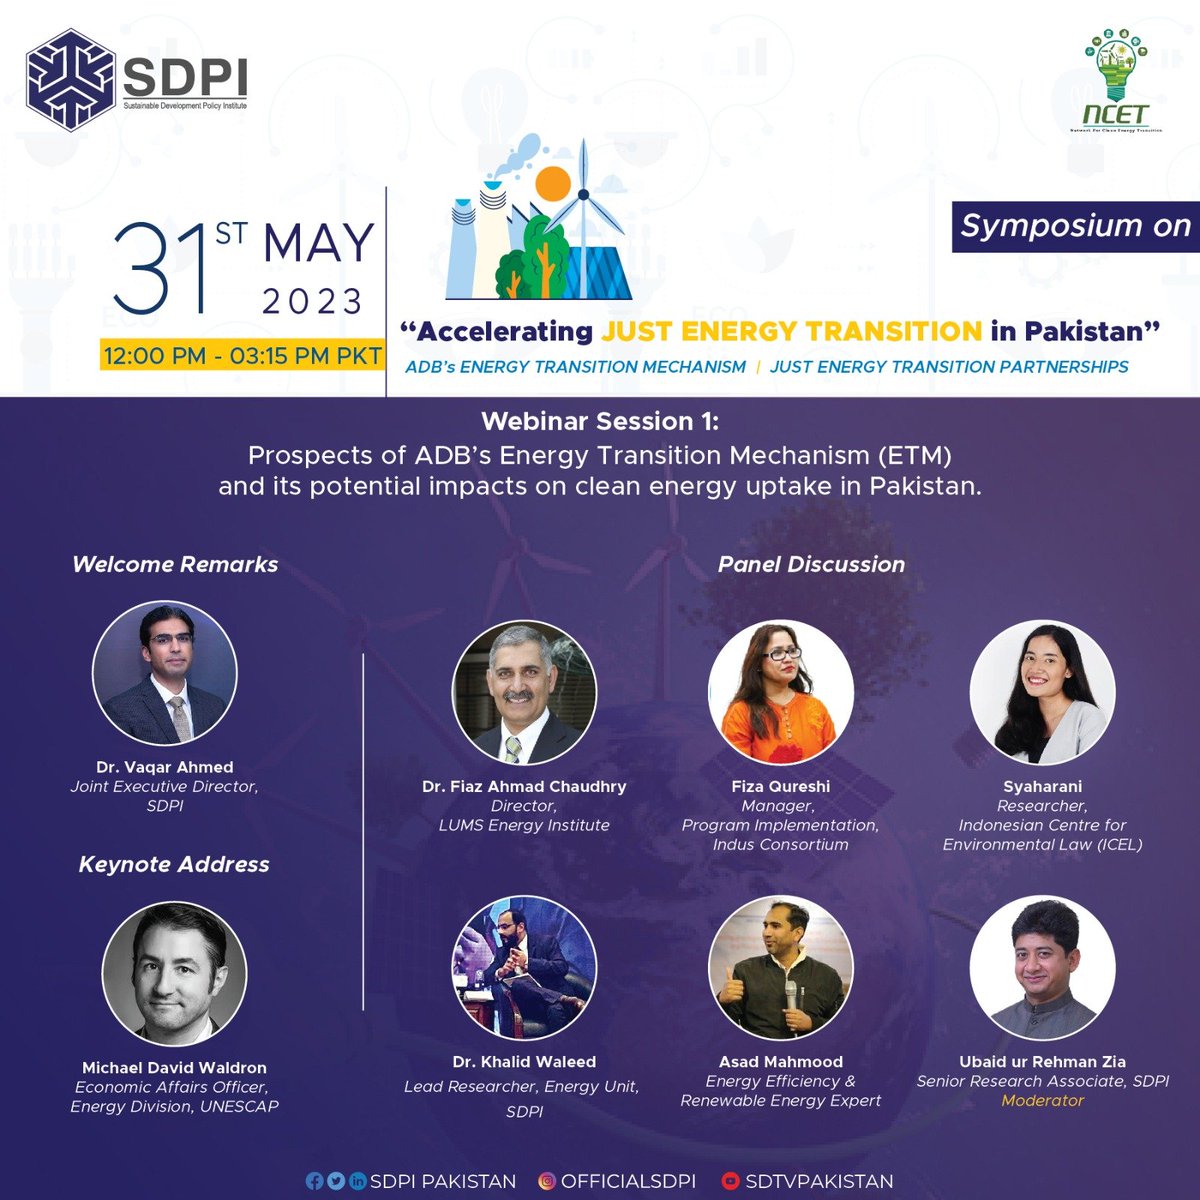 The esteemed Panel of the first session of @SDPIPakistan symposium on 'Prospects of ADBs ETM and its potential impacts on #cleanenergytransition in #Pakistan.

Join us Online:
📆 31st May, 2023   
🕐12:00 pm - 01:30 pm (PKT)
🔗bit.ly/41itcoD